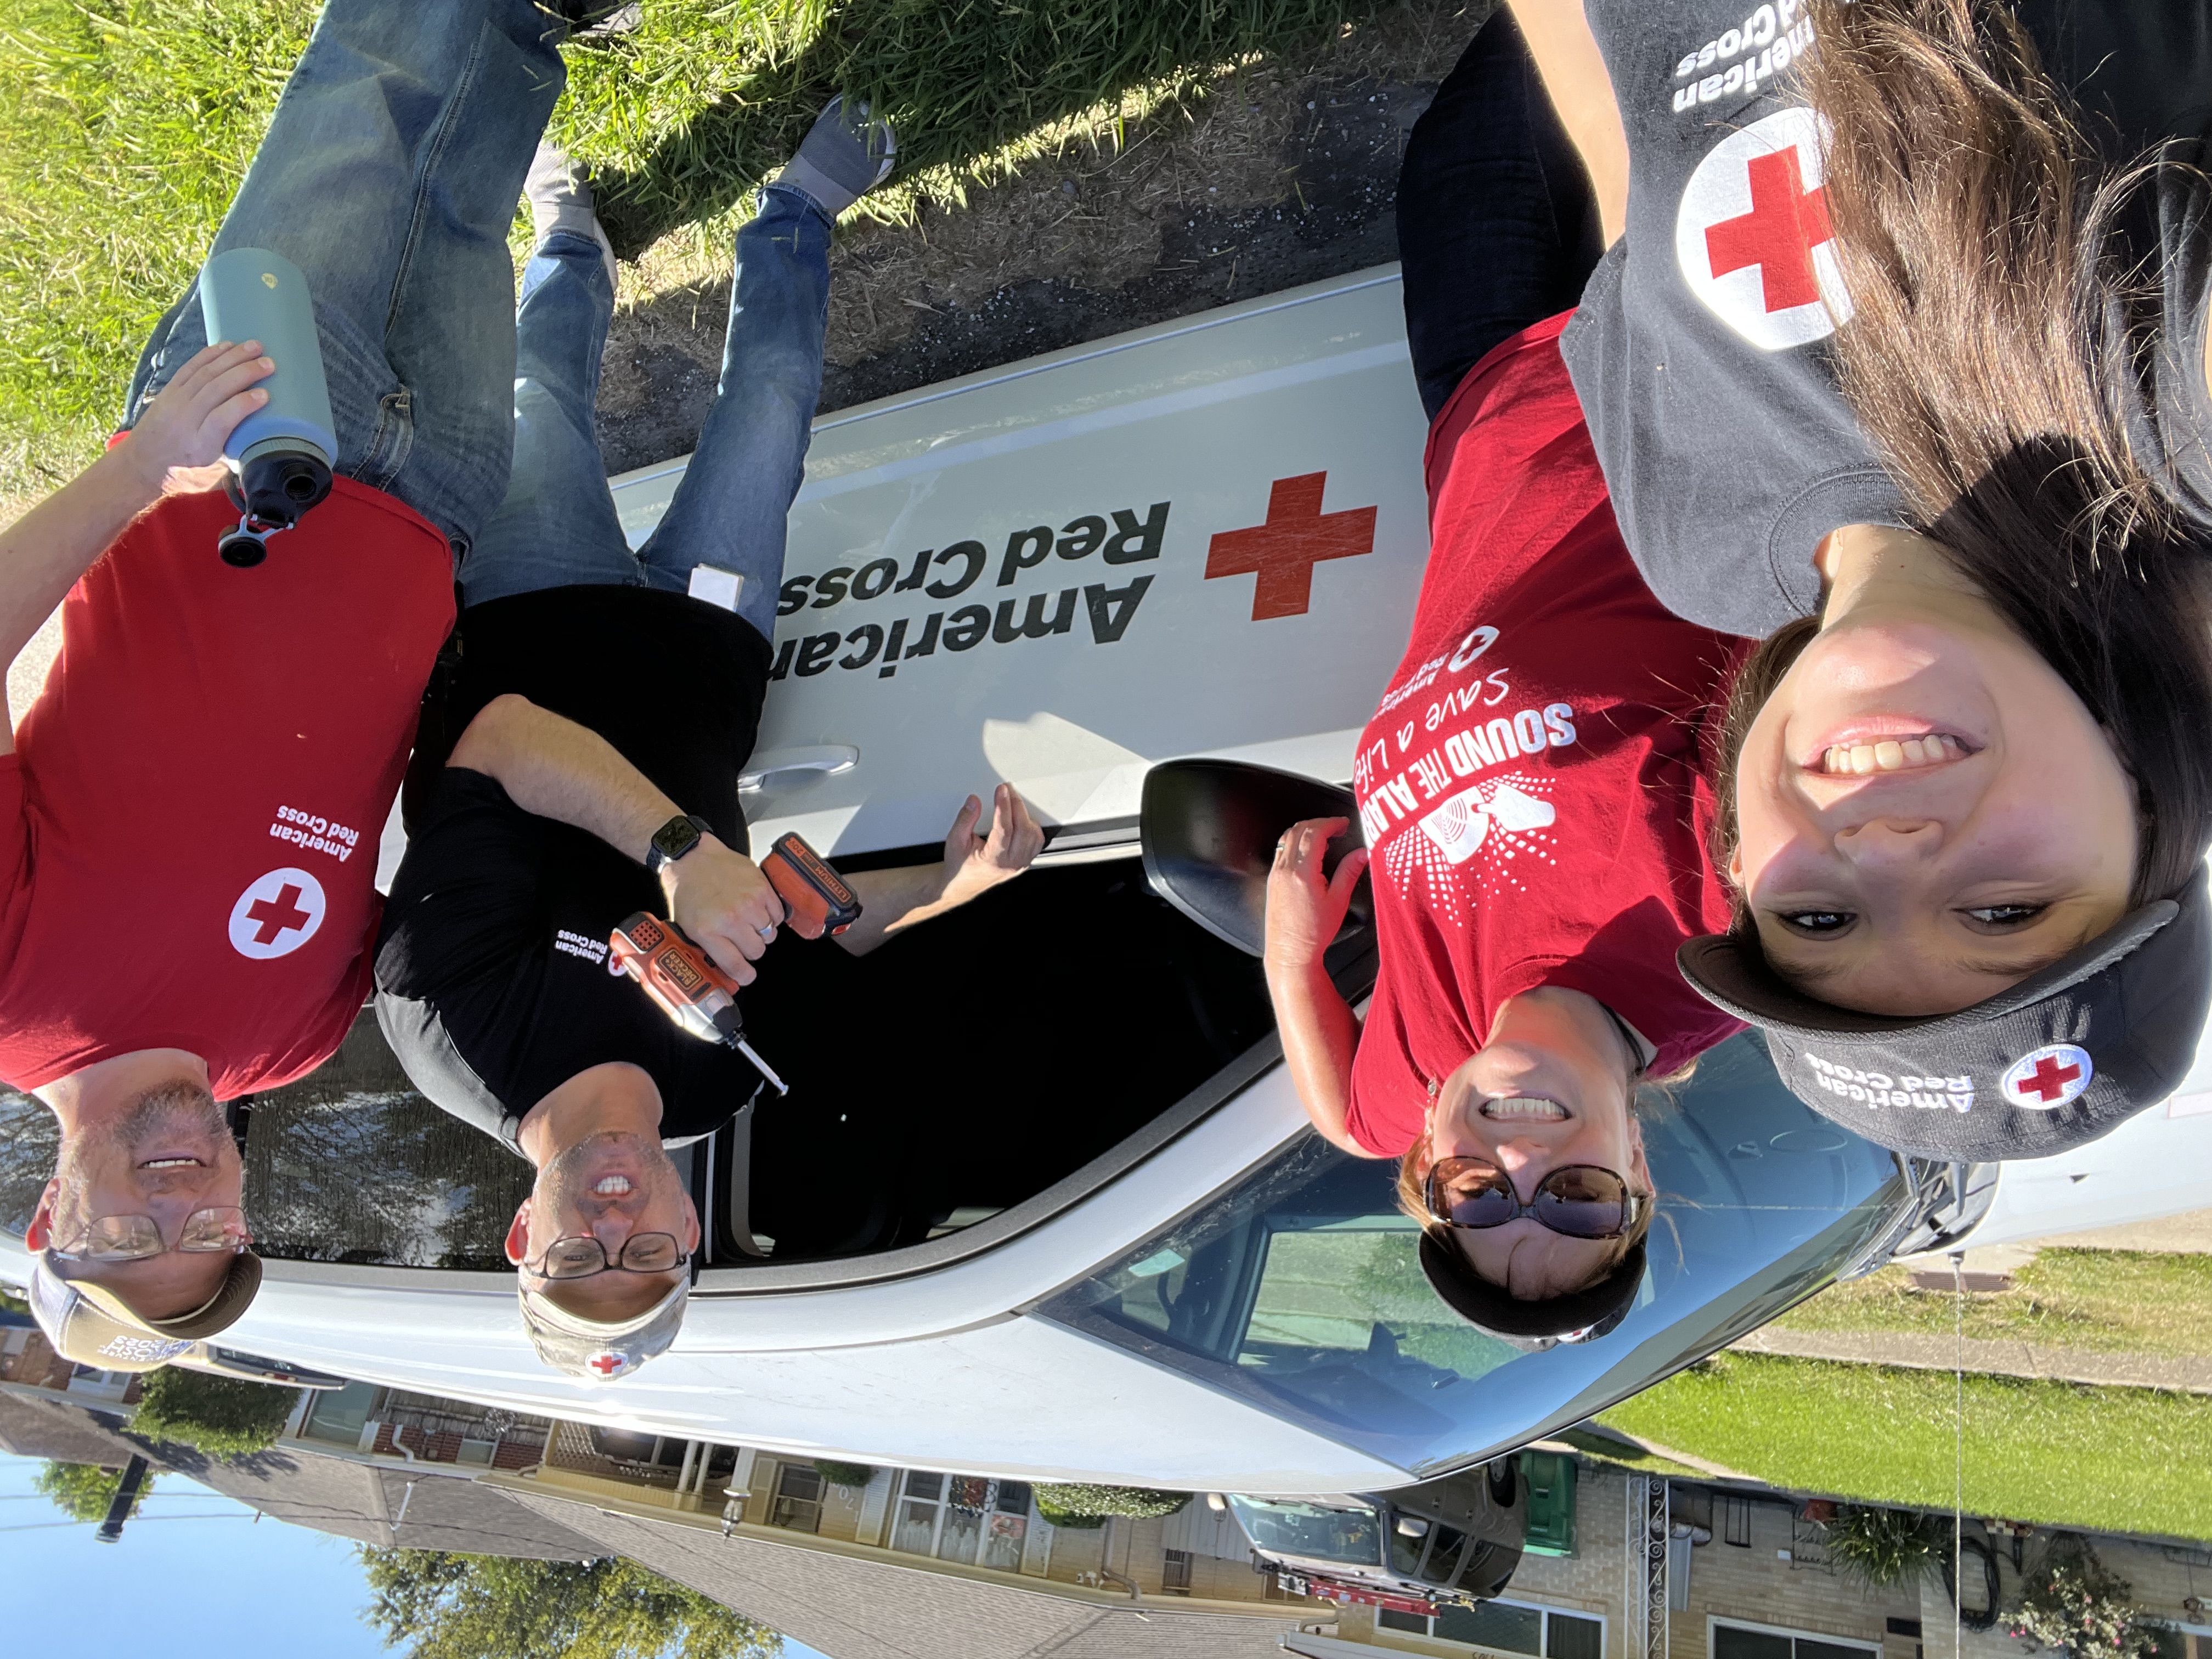 red cross volunteers smiling in front of a red cross vehicle